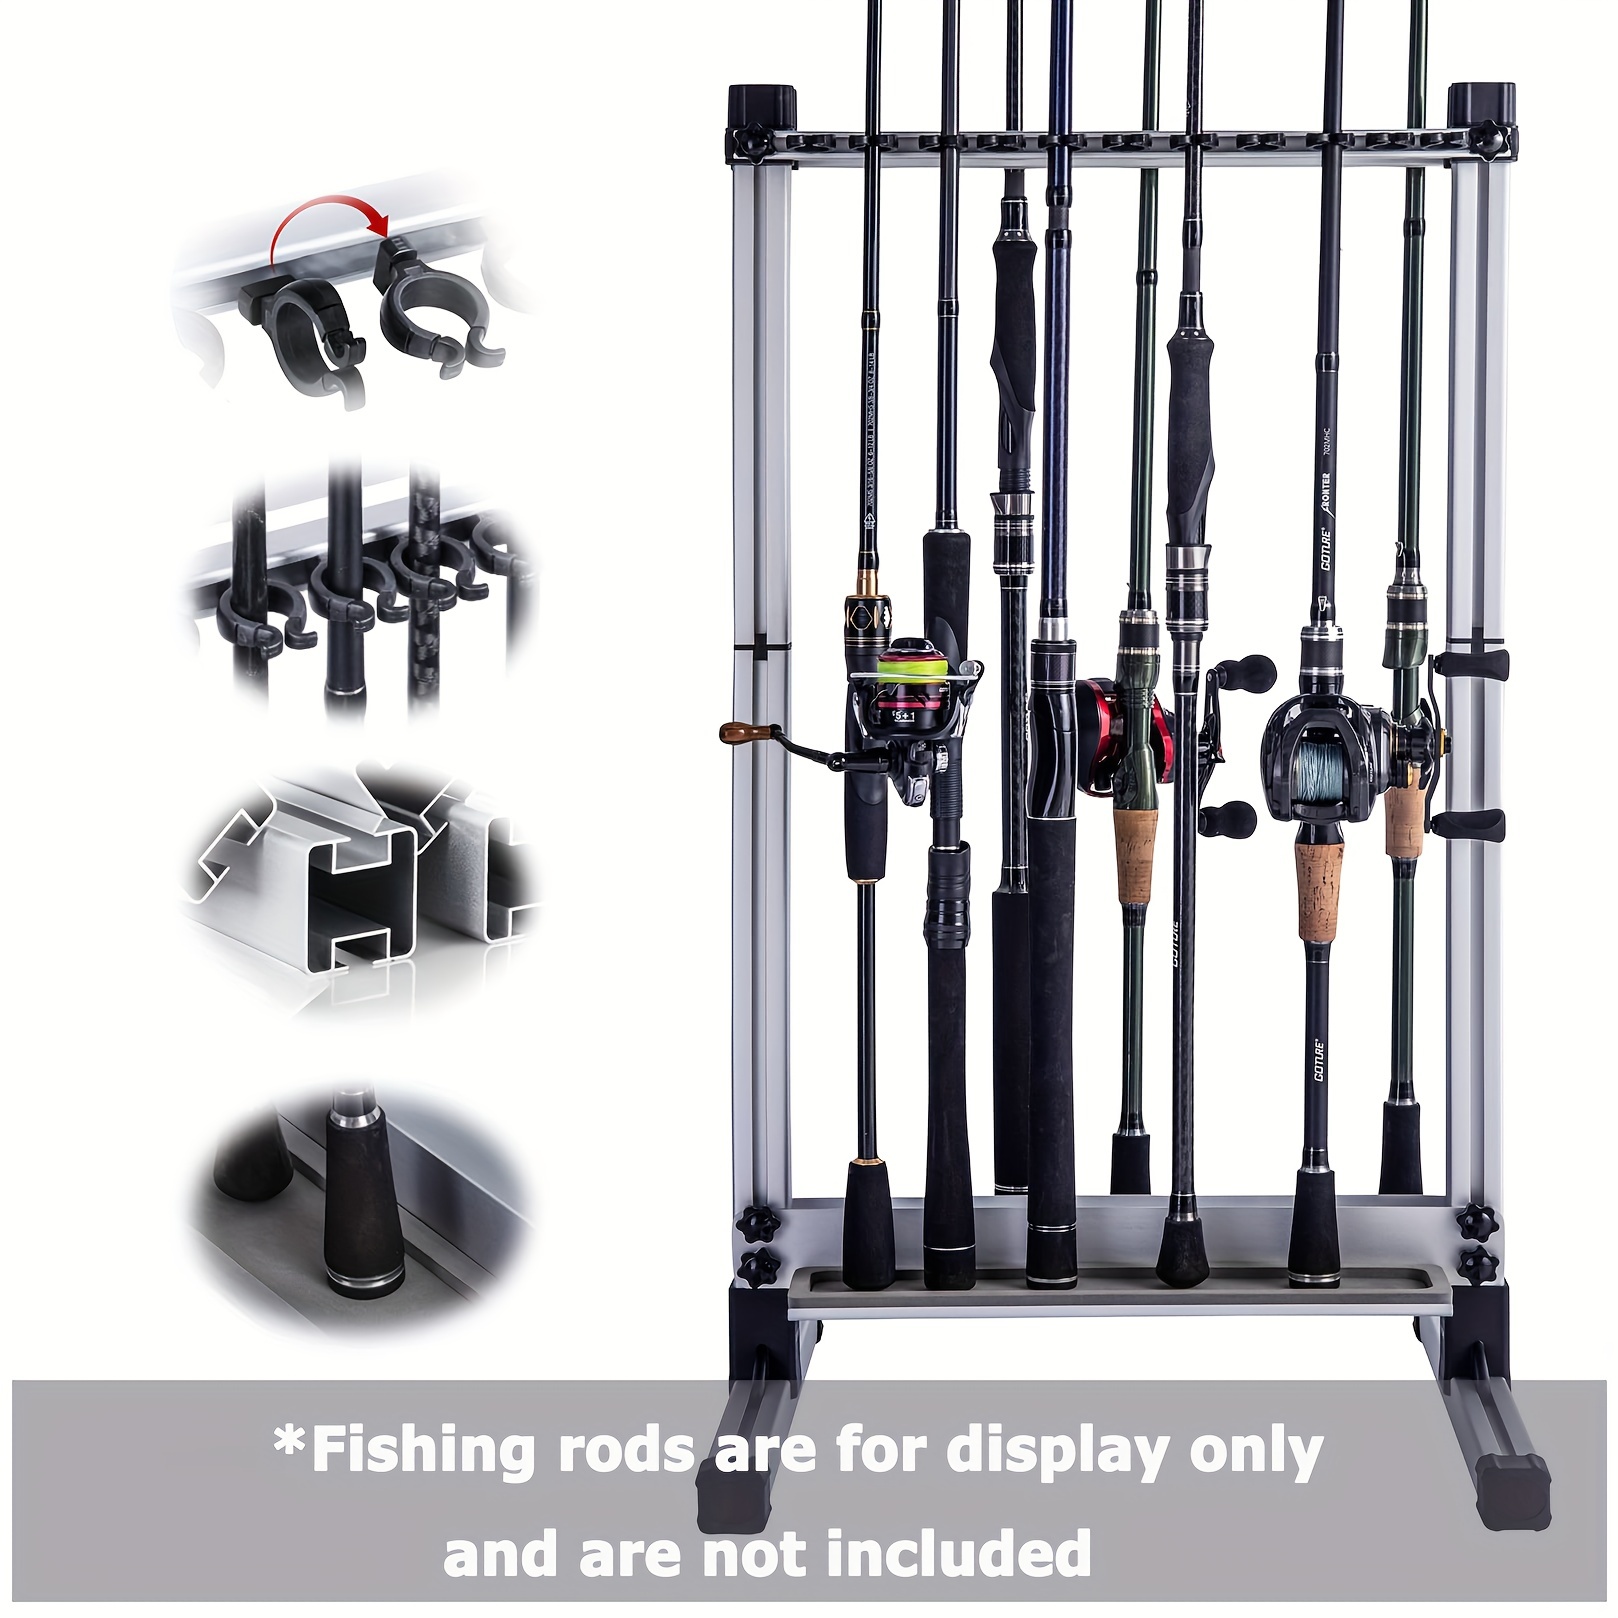 24-Slot Removable Fishing Rod Holder - Adjustable, Space-Saving Storage  Organizer for Home & Garage - Perfect Gift for Men!